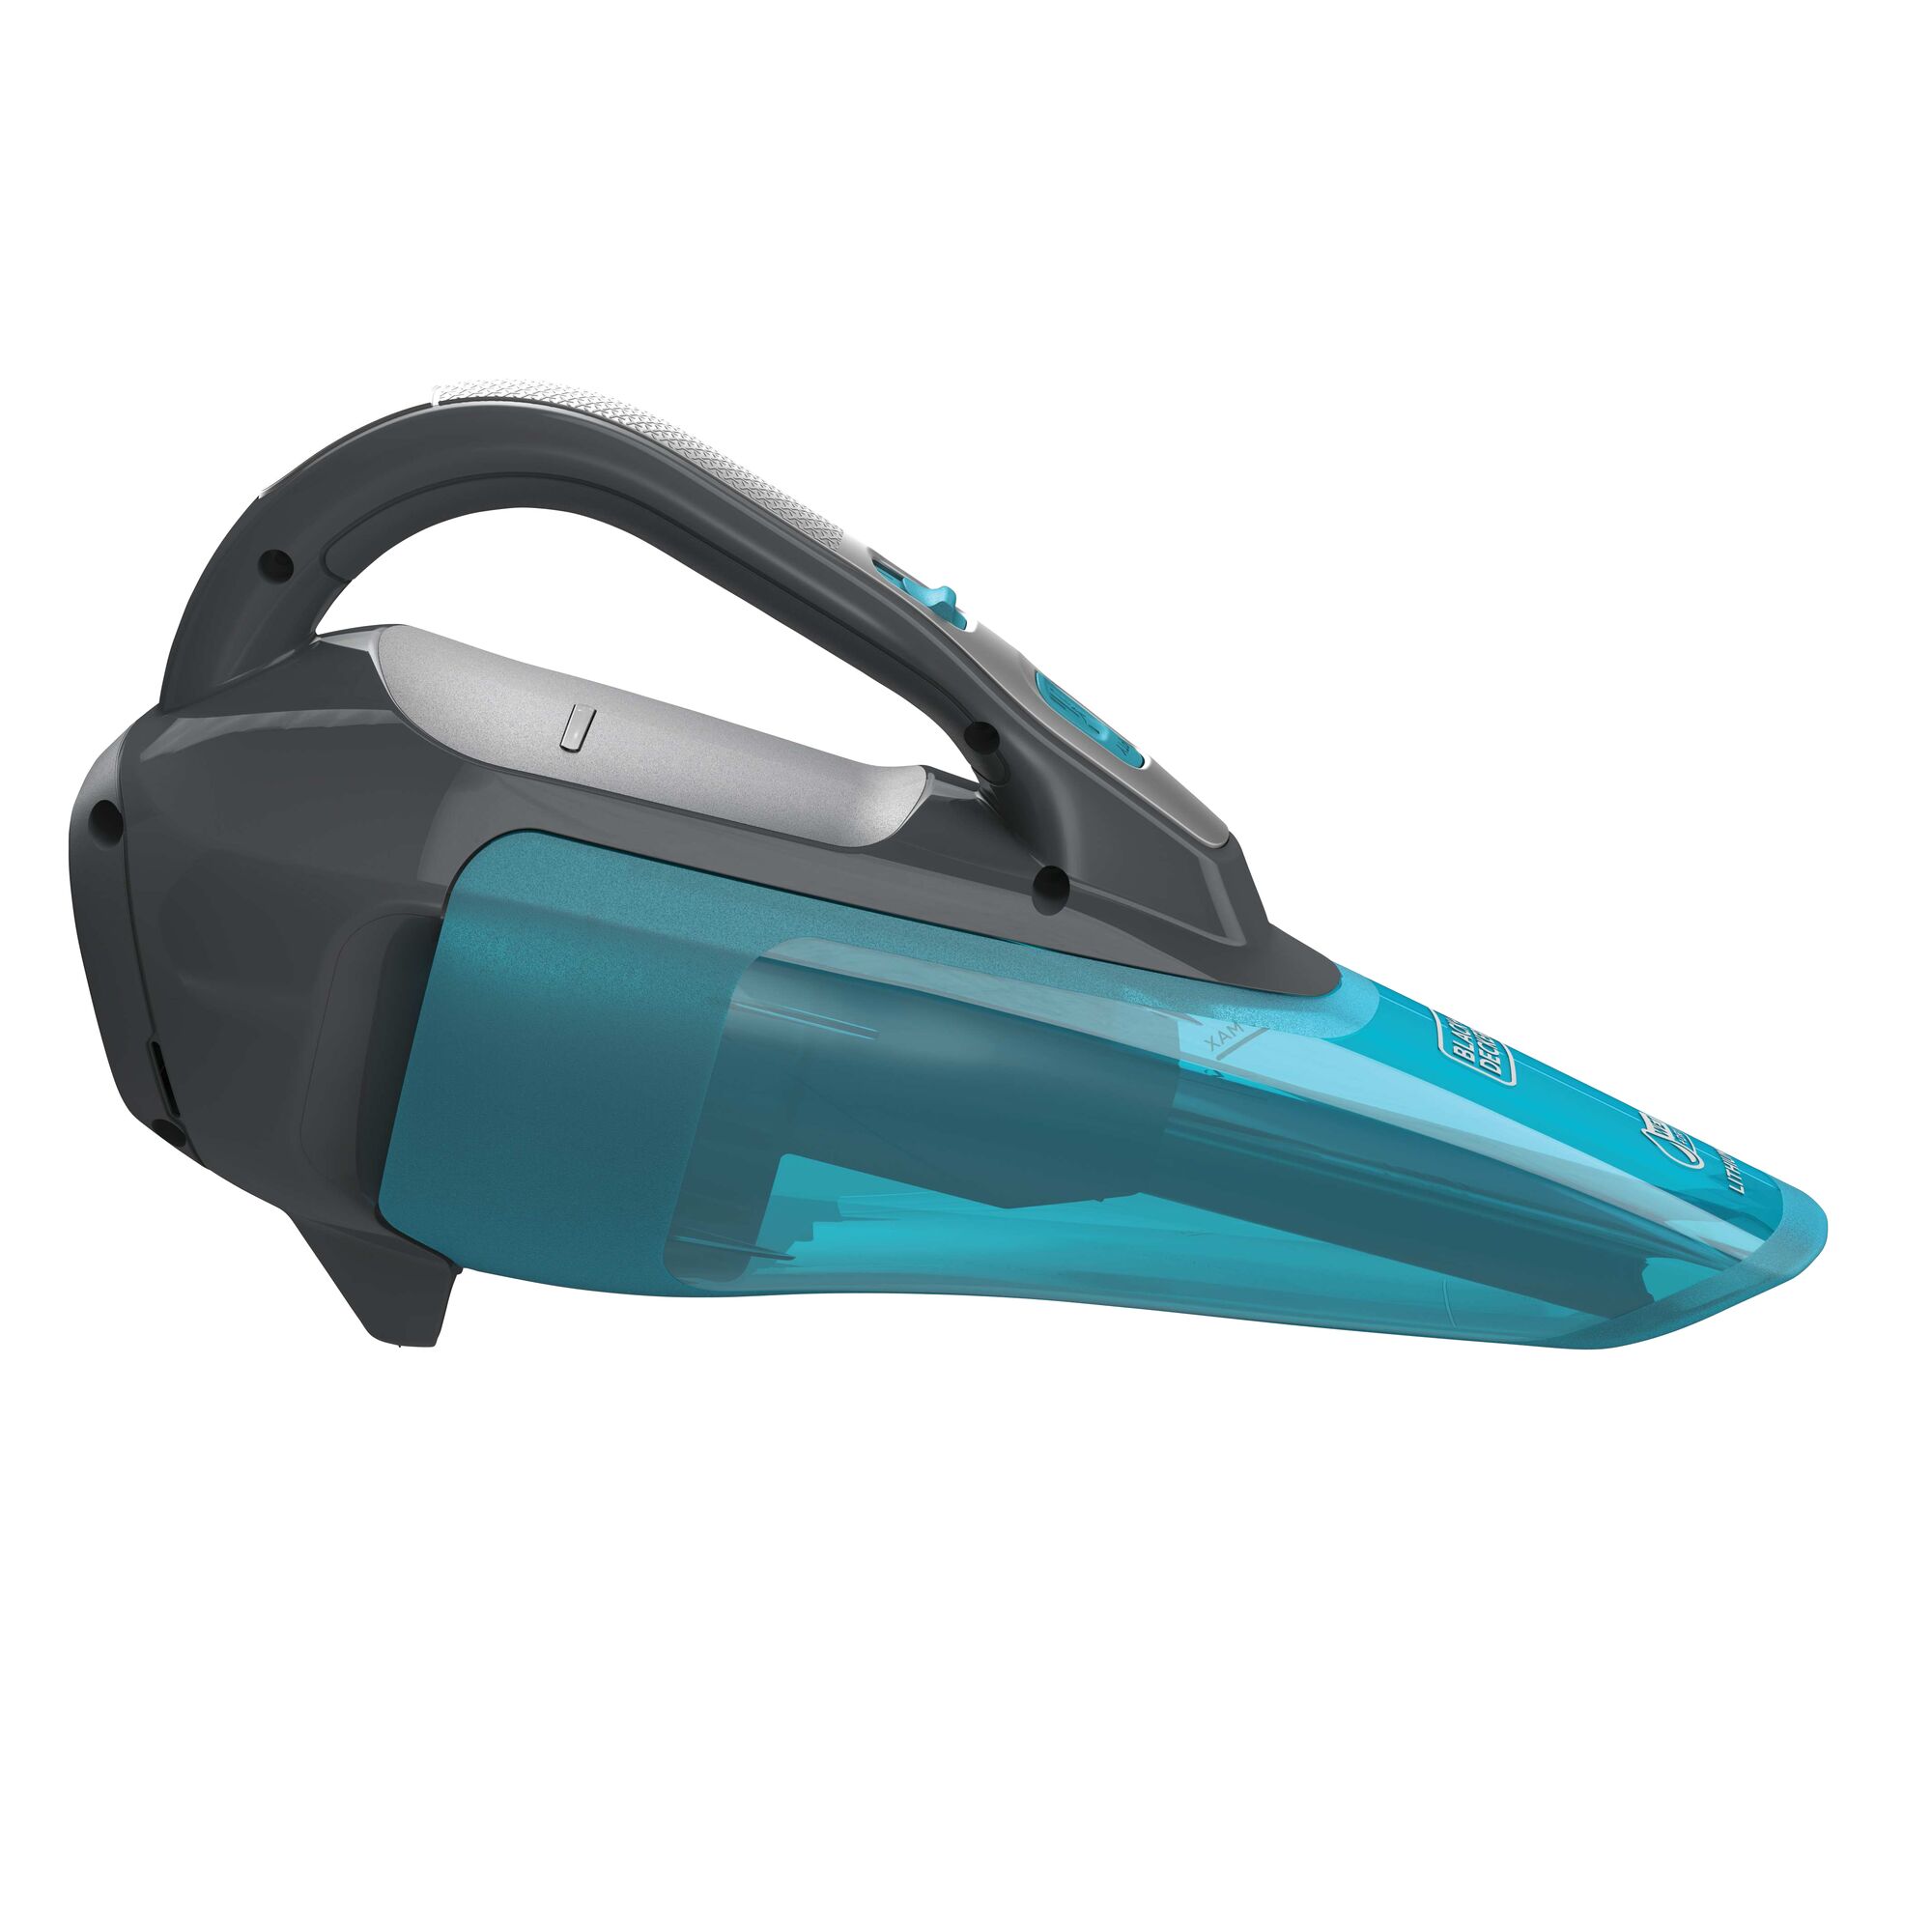 Profile of Dustbuster AdvancedClean Wet Dry Cordless Hand Vacuum.